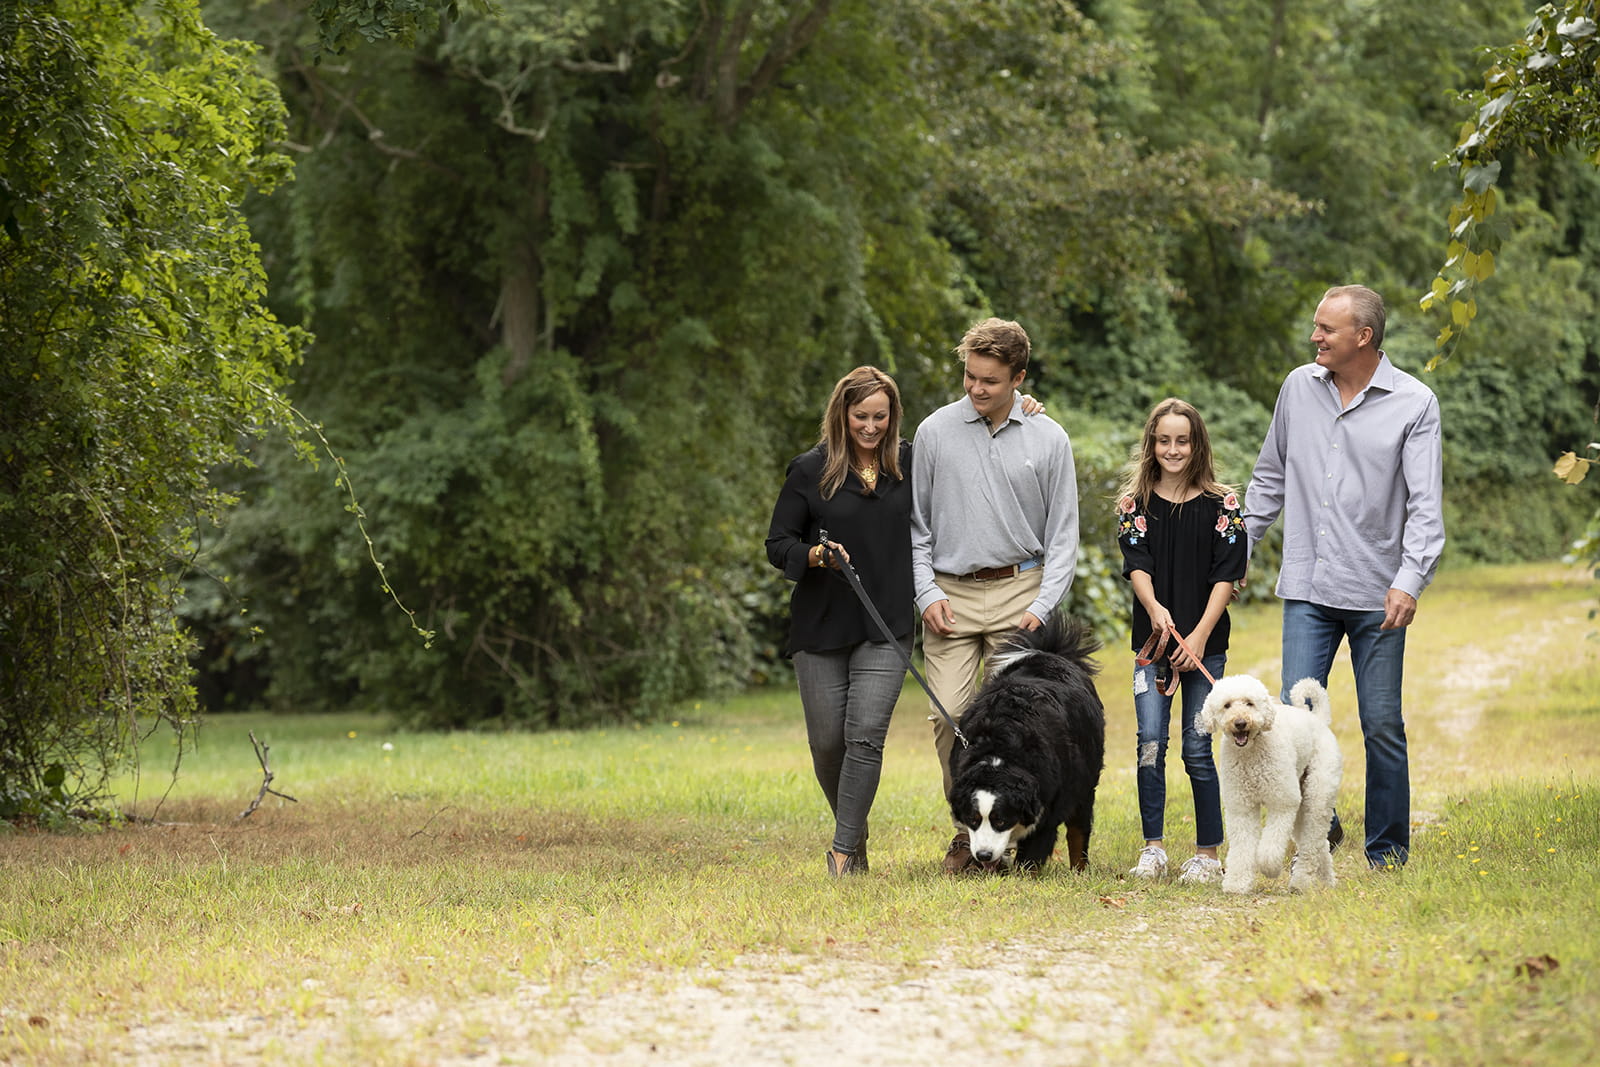 Logan and his family walking their dogs